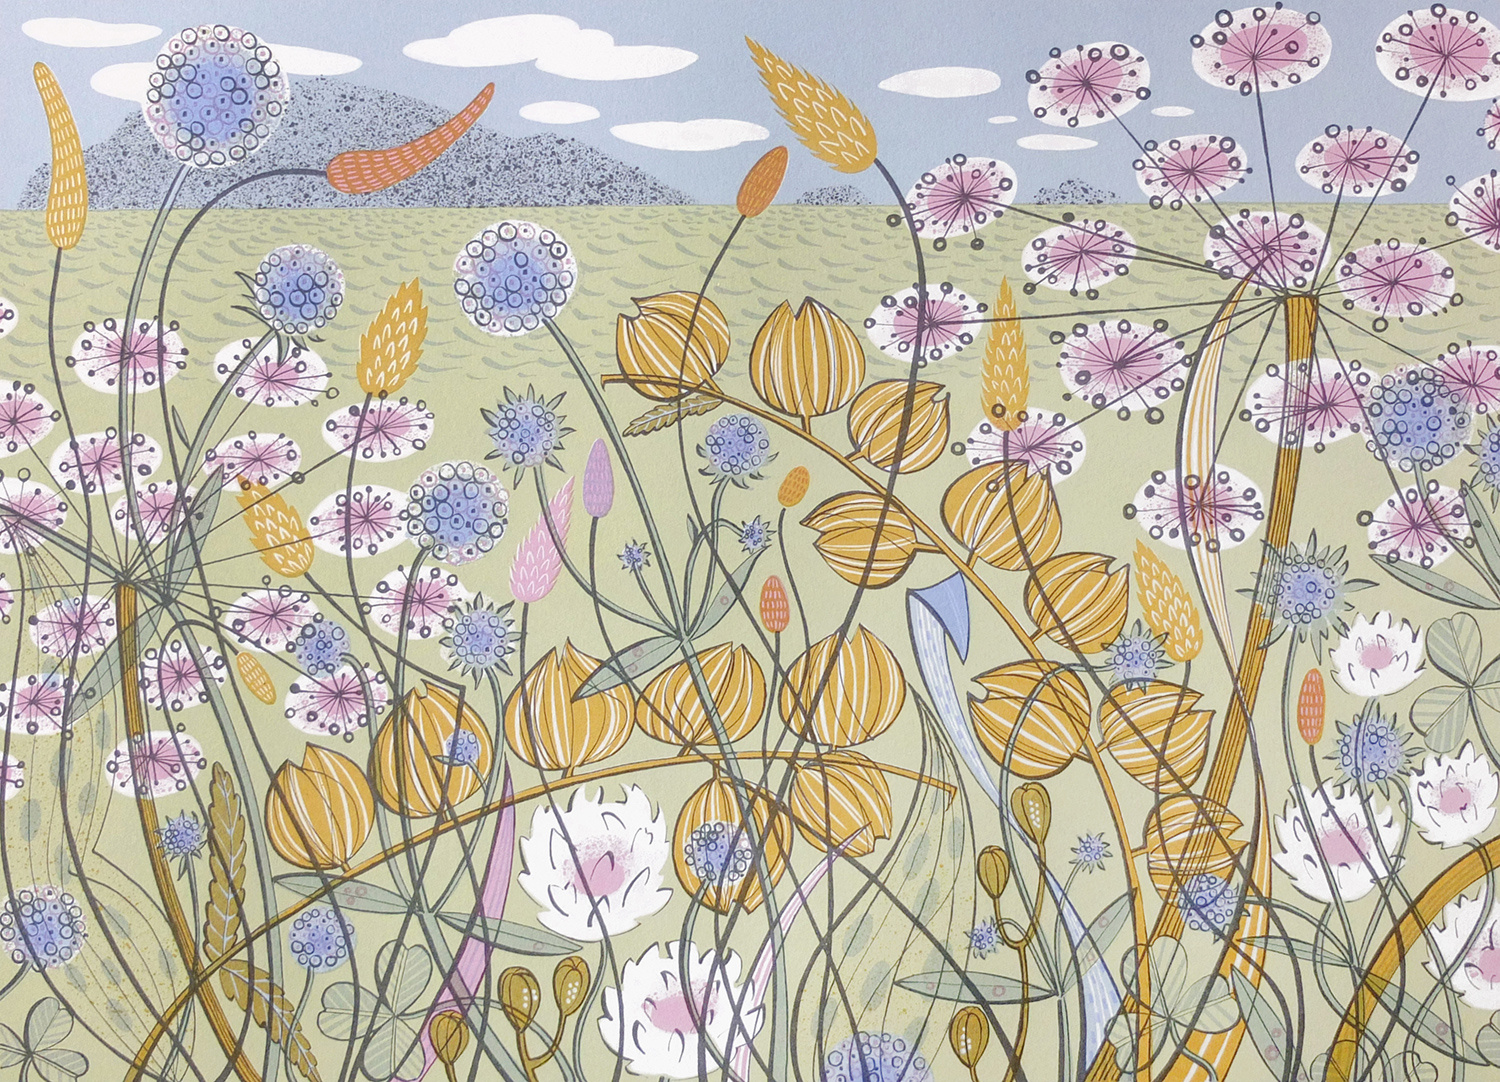 Machair by Angie Lewin